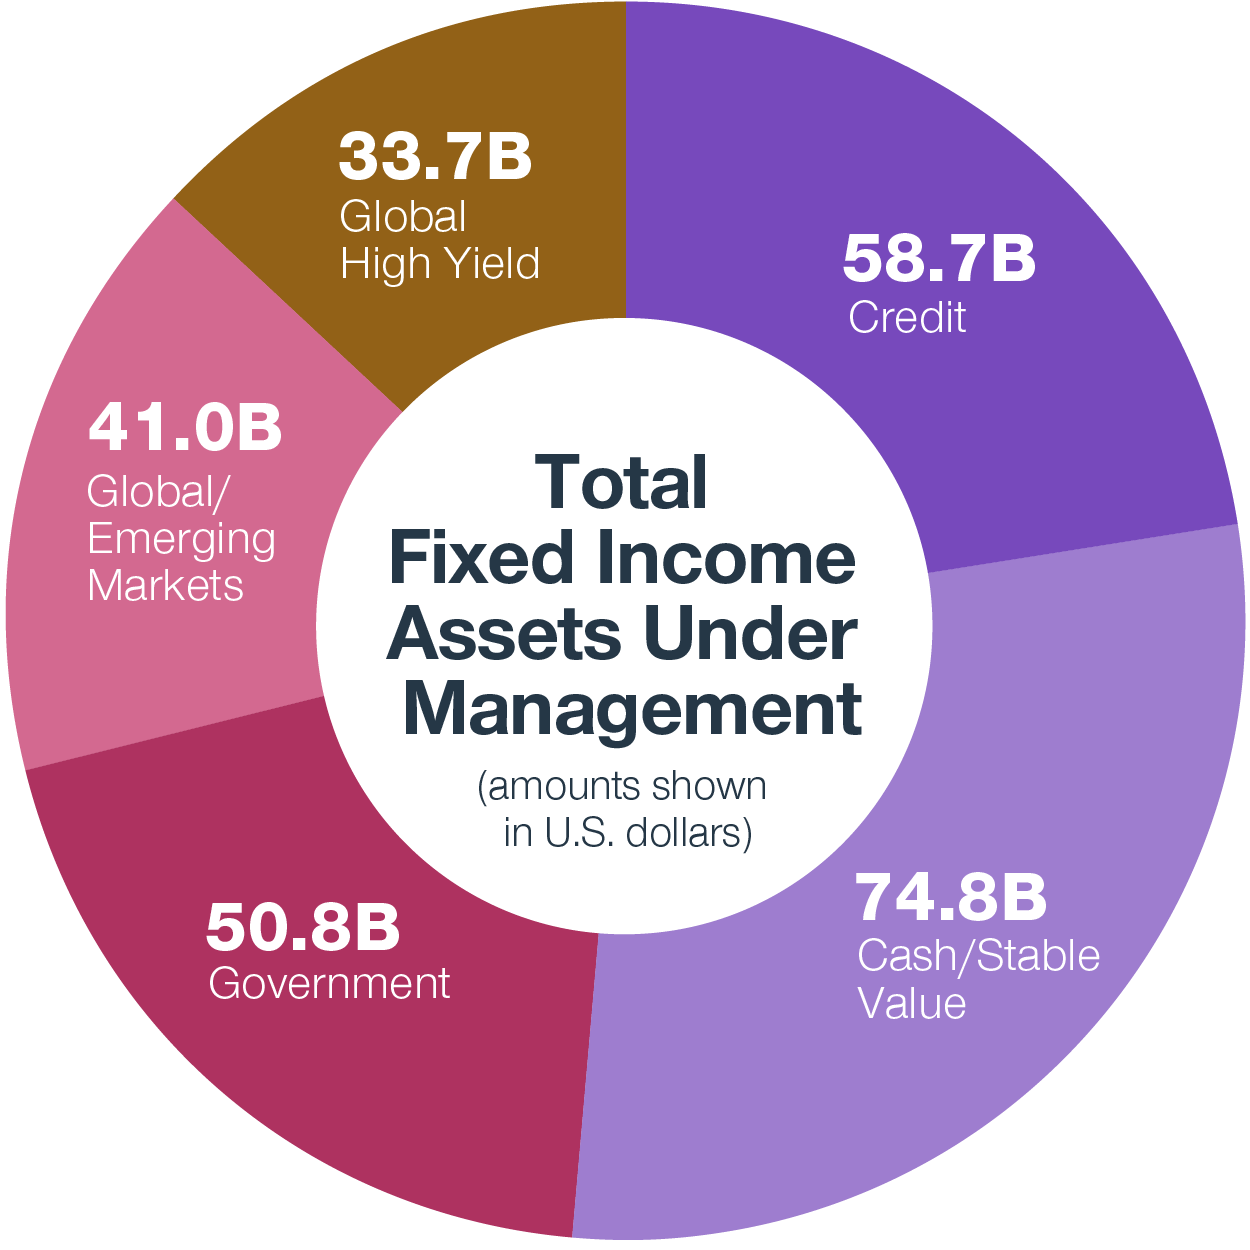 Total Fixed Income Assets Under Management. $33.7b Global High Yield, $58.7b Credit, $74.8b Cash/Stable Value, $50.8b Government, $41.0b Global/Emerging Markets.